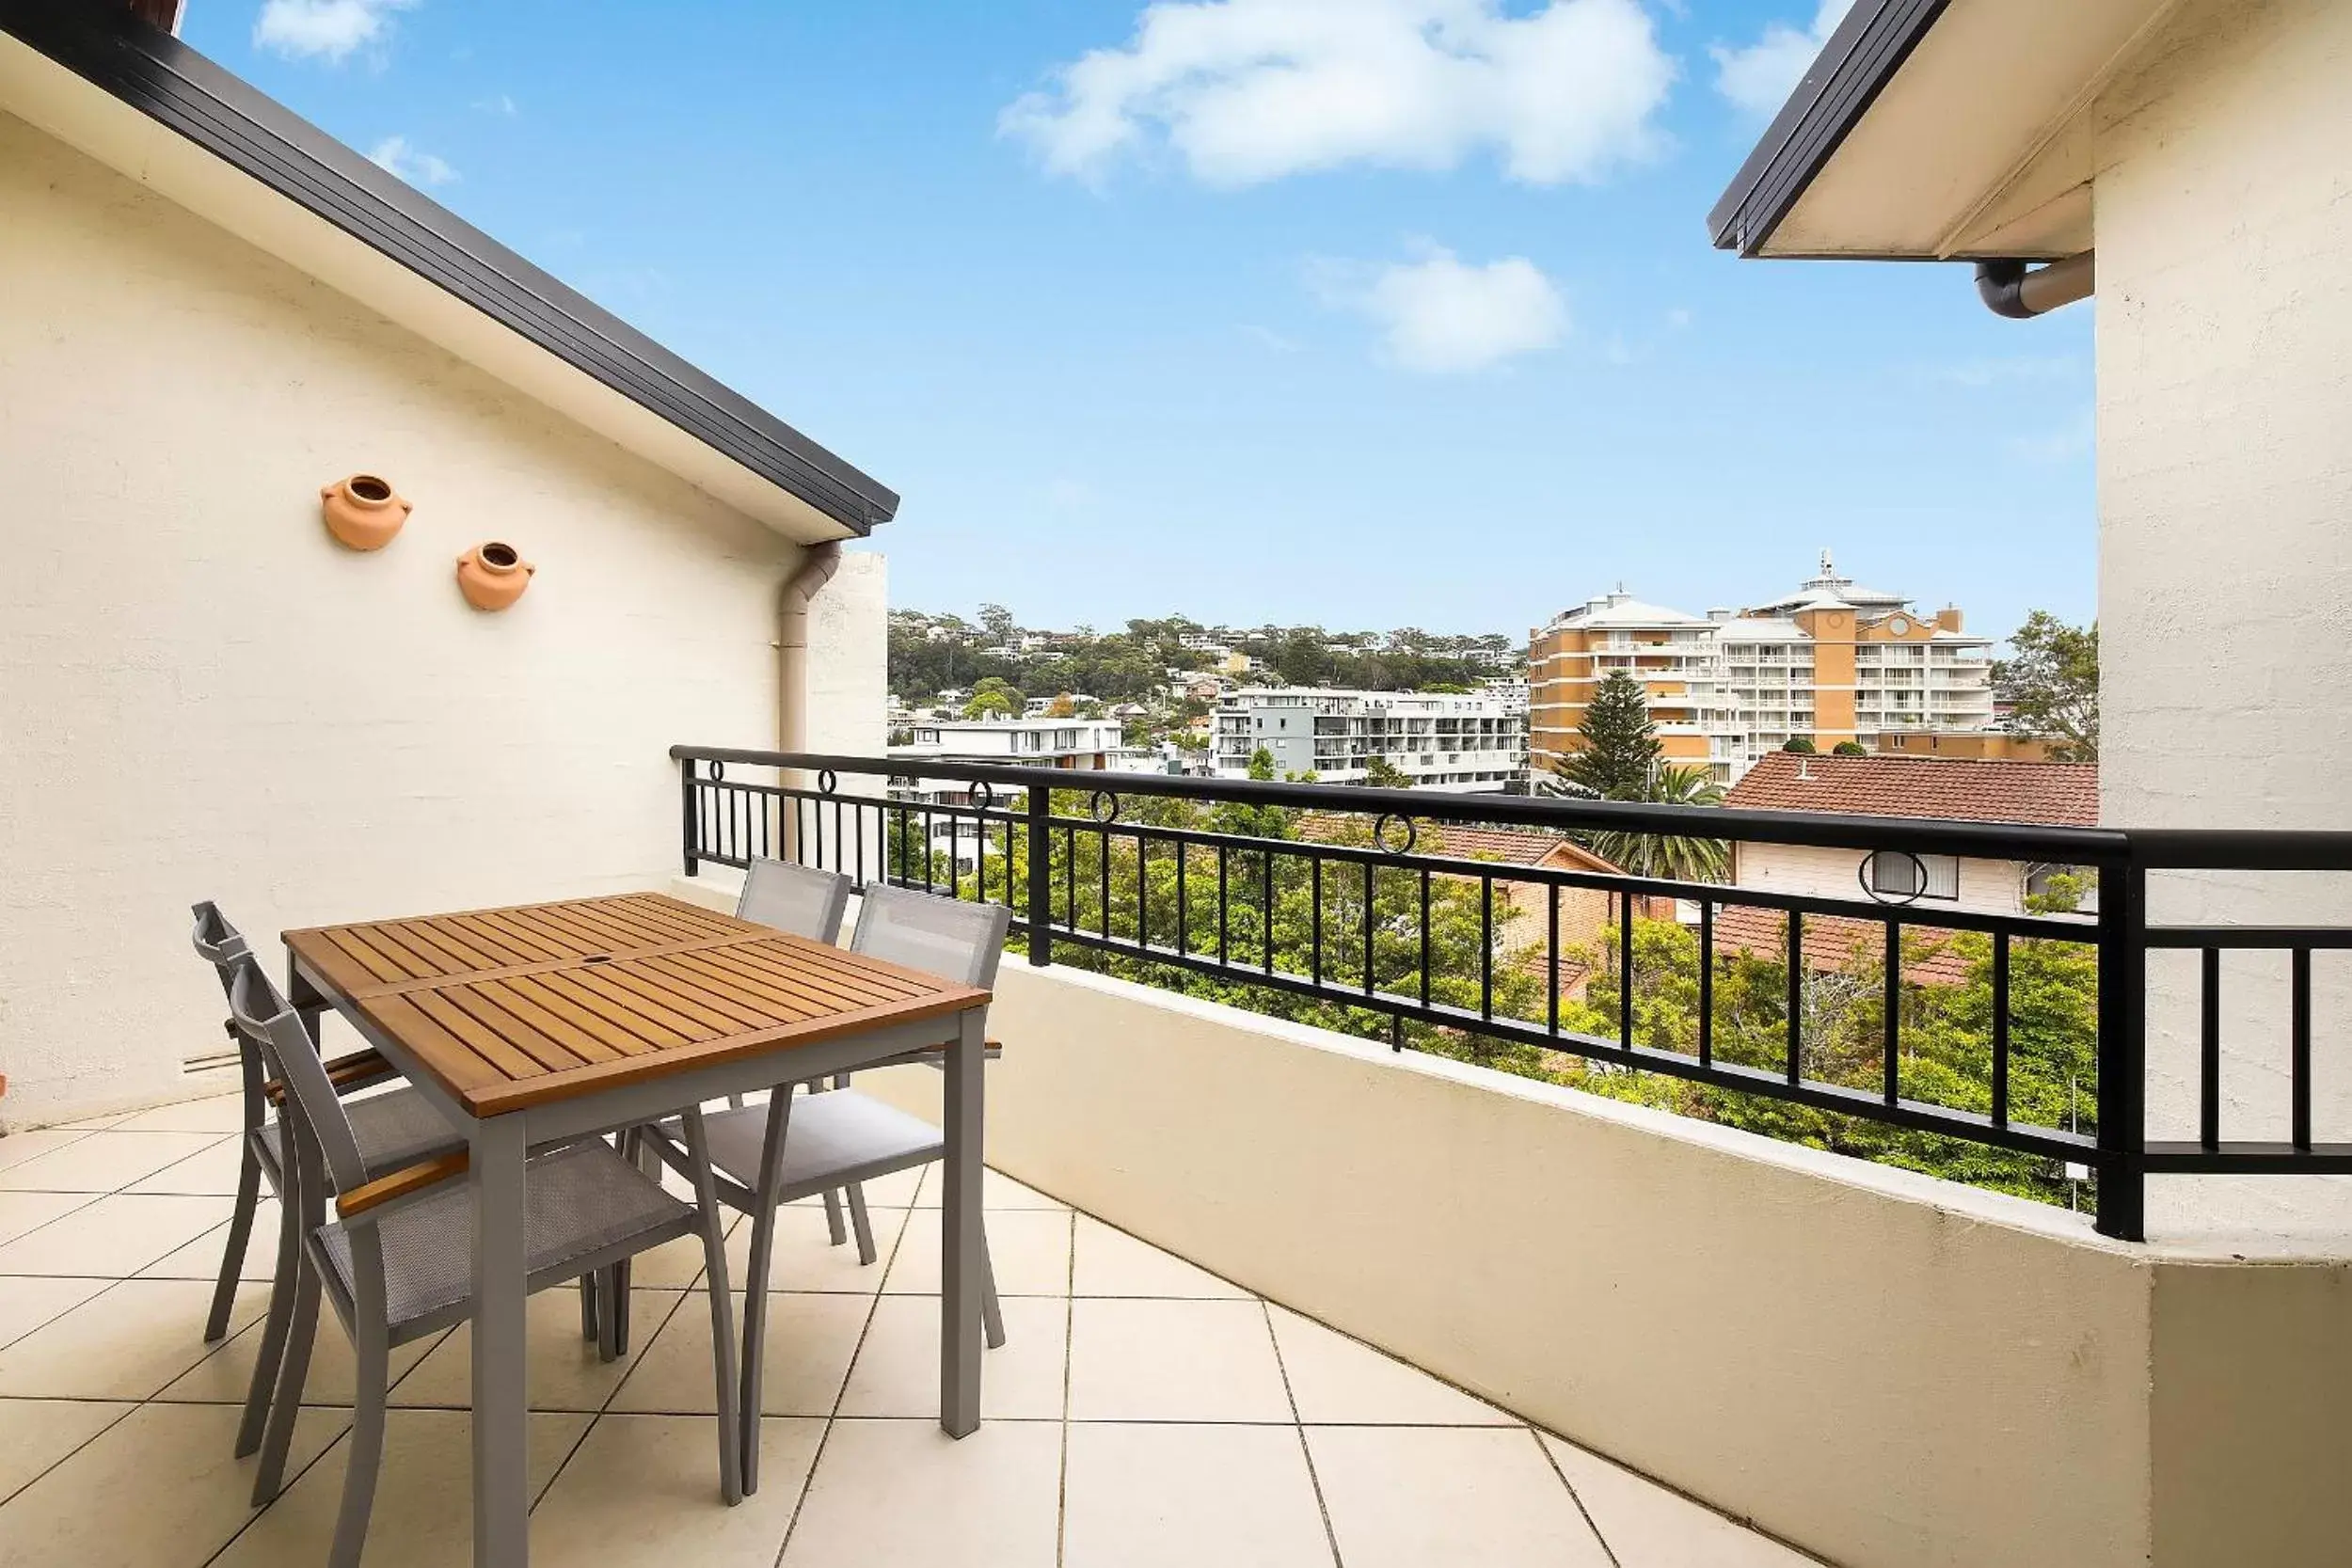 Balcony/Terrace in Terrigal Sails Serviced Apartments